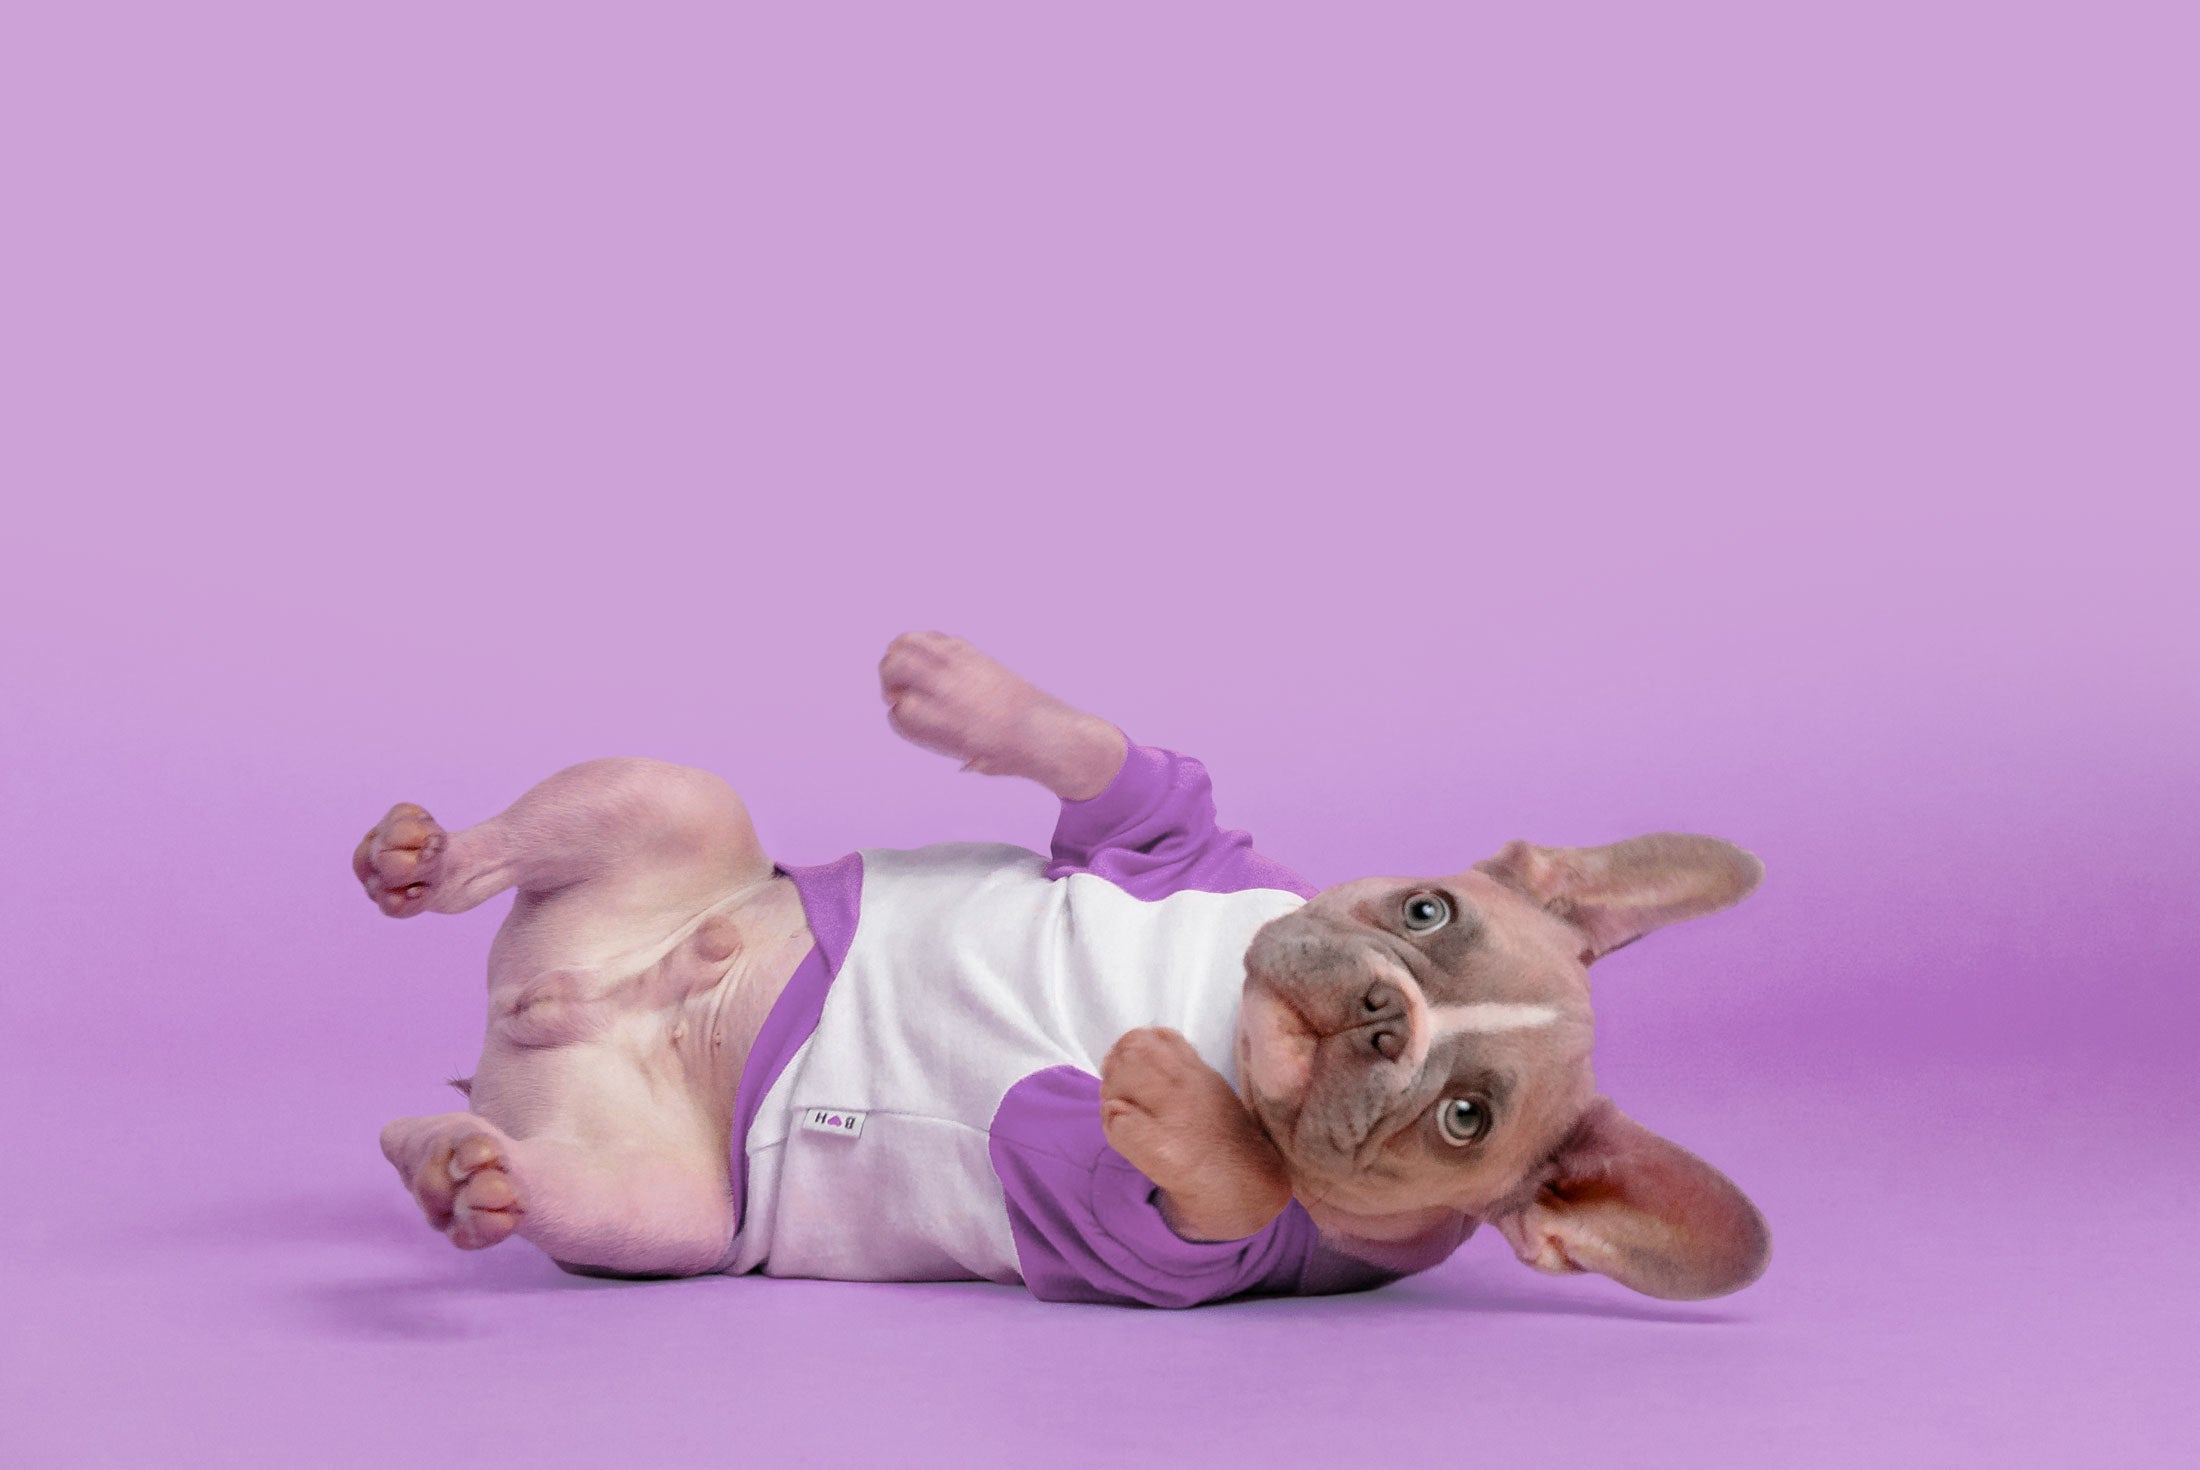 French bulldog in white and lavender shirt lies on side as though he accidentally fell over